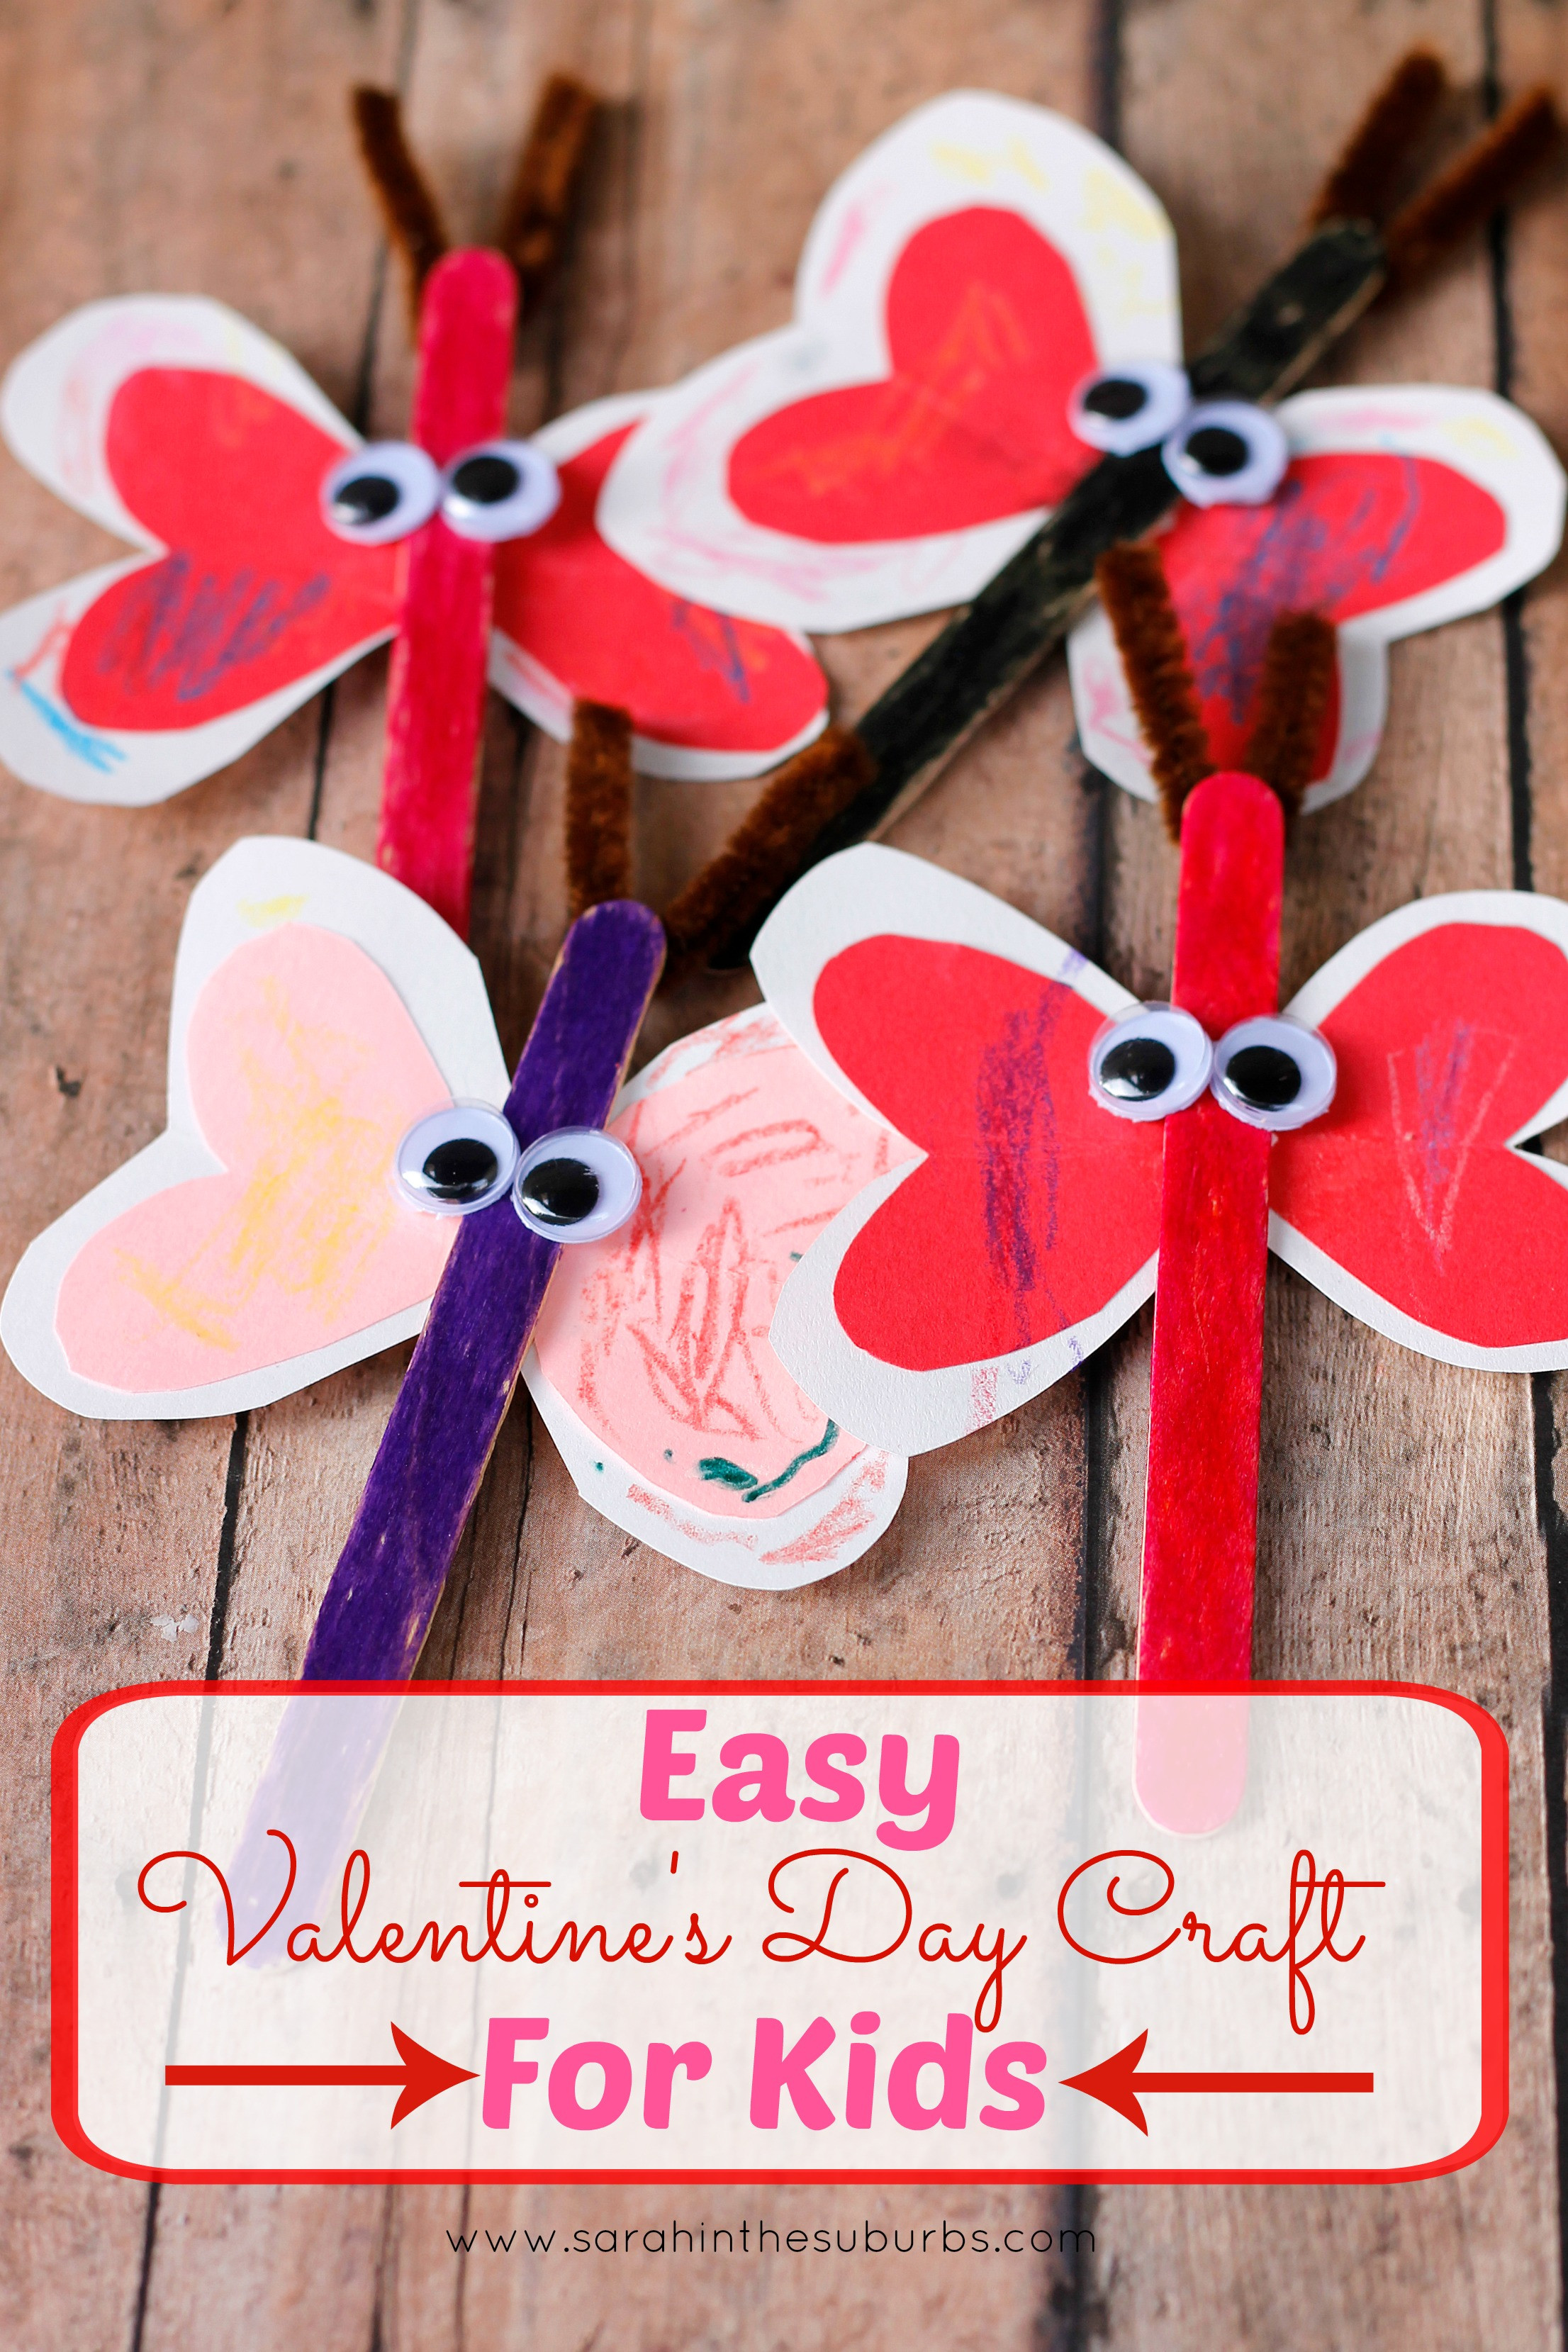 Valentine Day Crafts For Preschoolers Easy
 Love Bug Valentine s Day Craft for Kids Sarah in the Suburbs